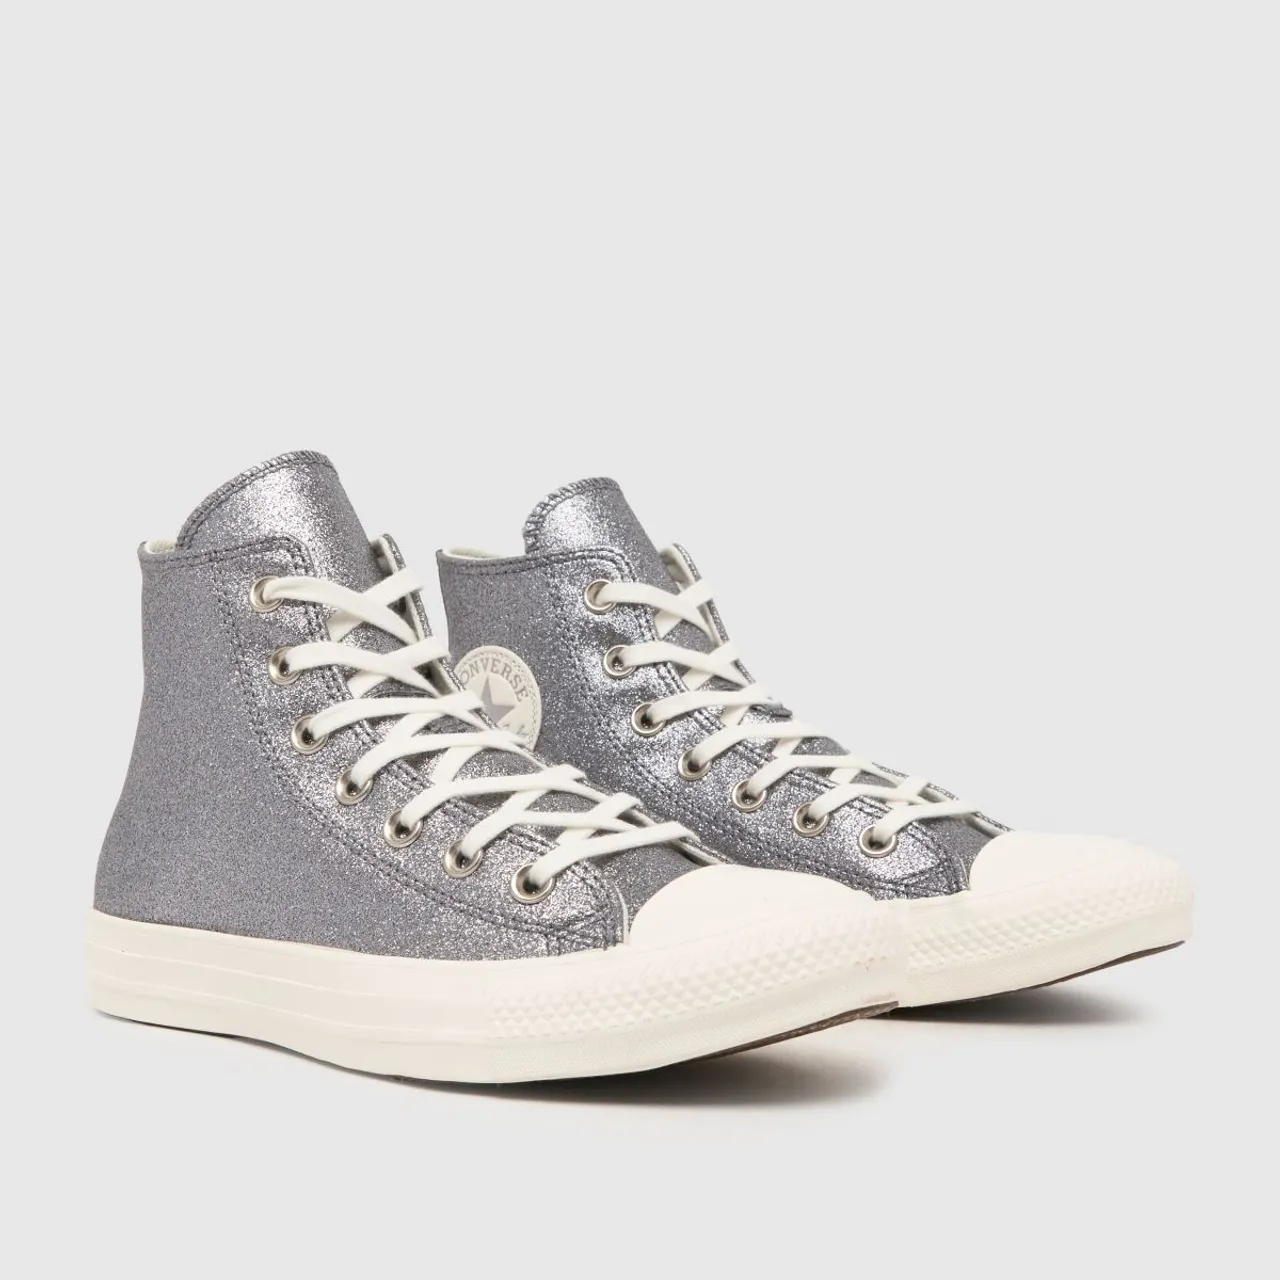 Converse All Star Hi Sparkle Trainers In Grey